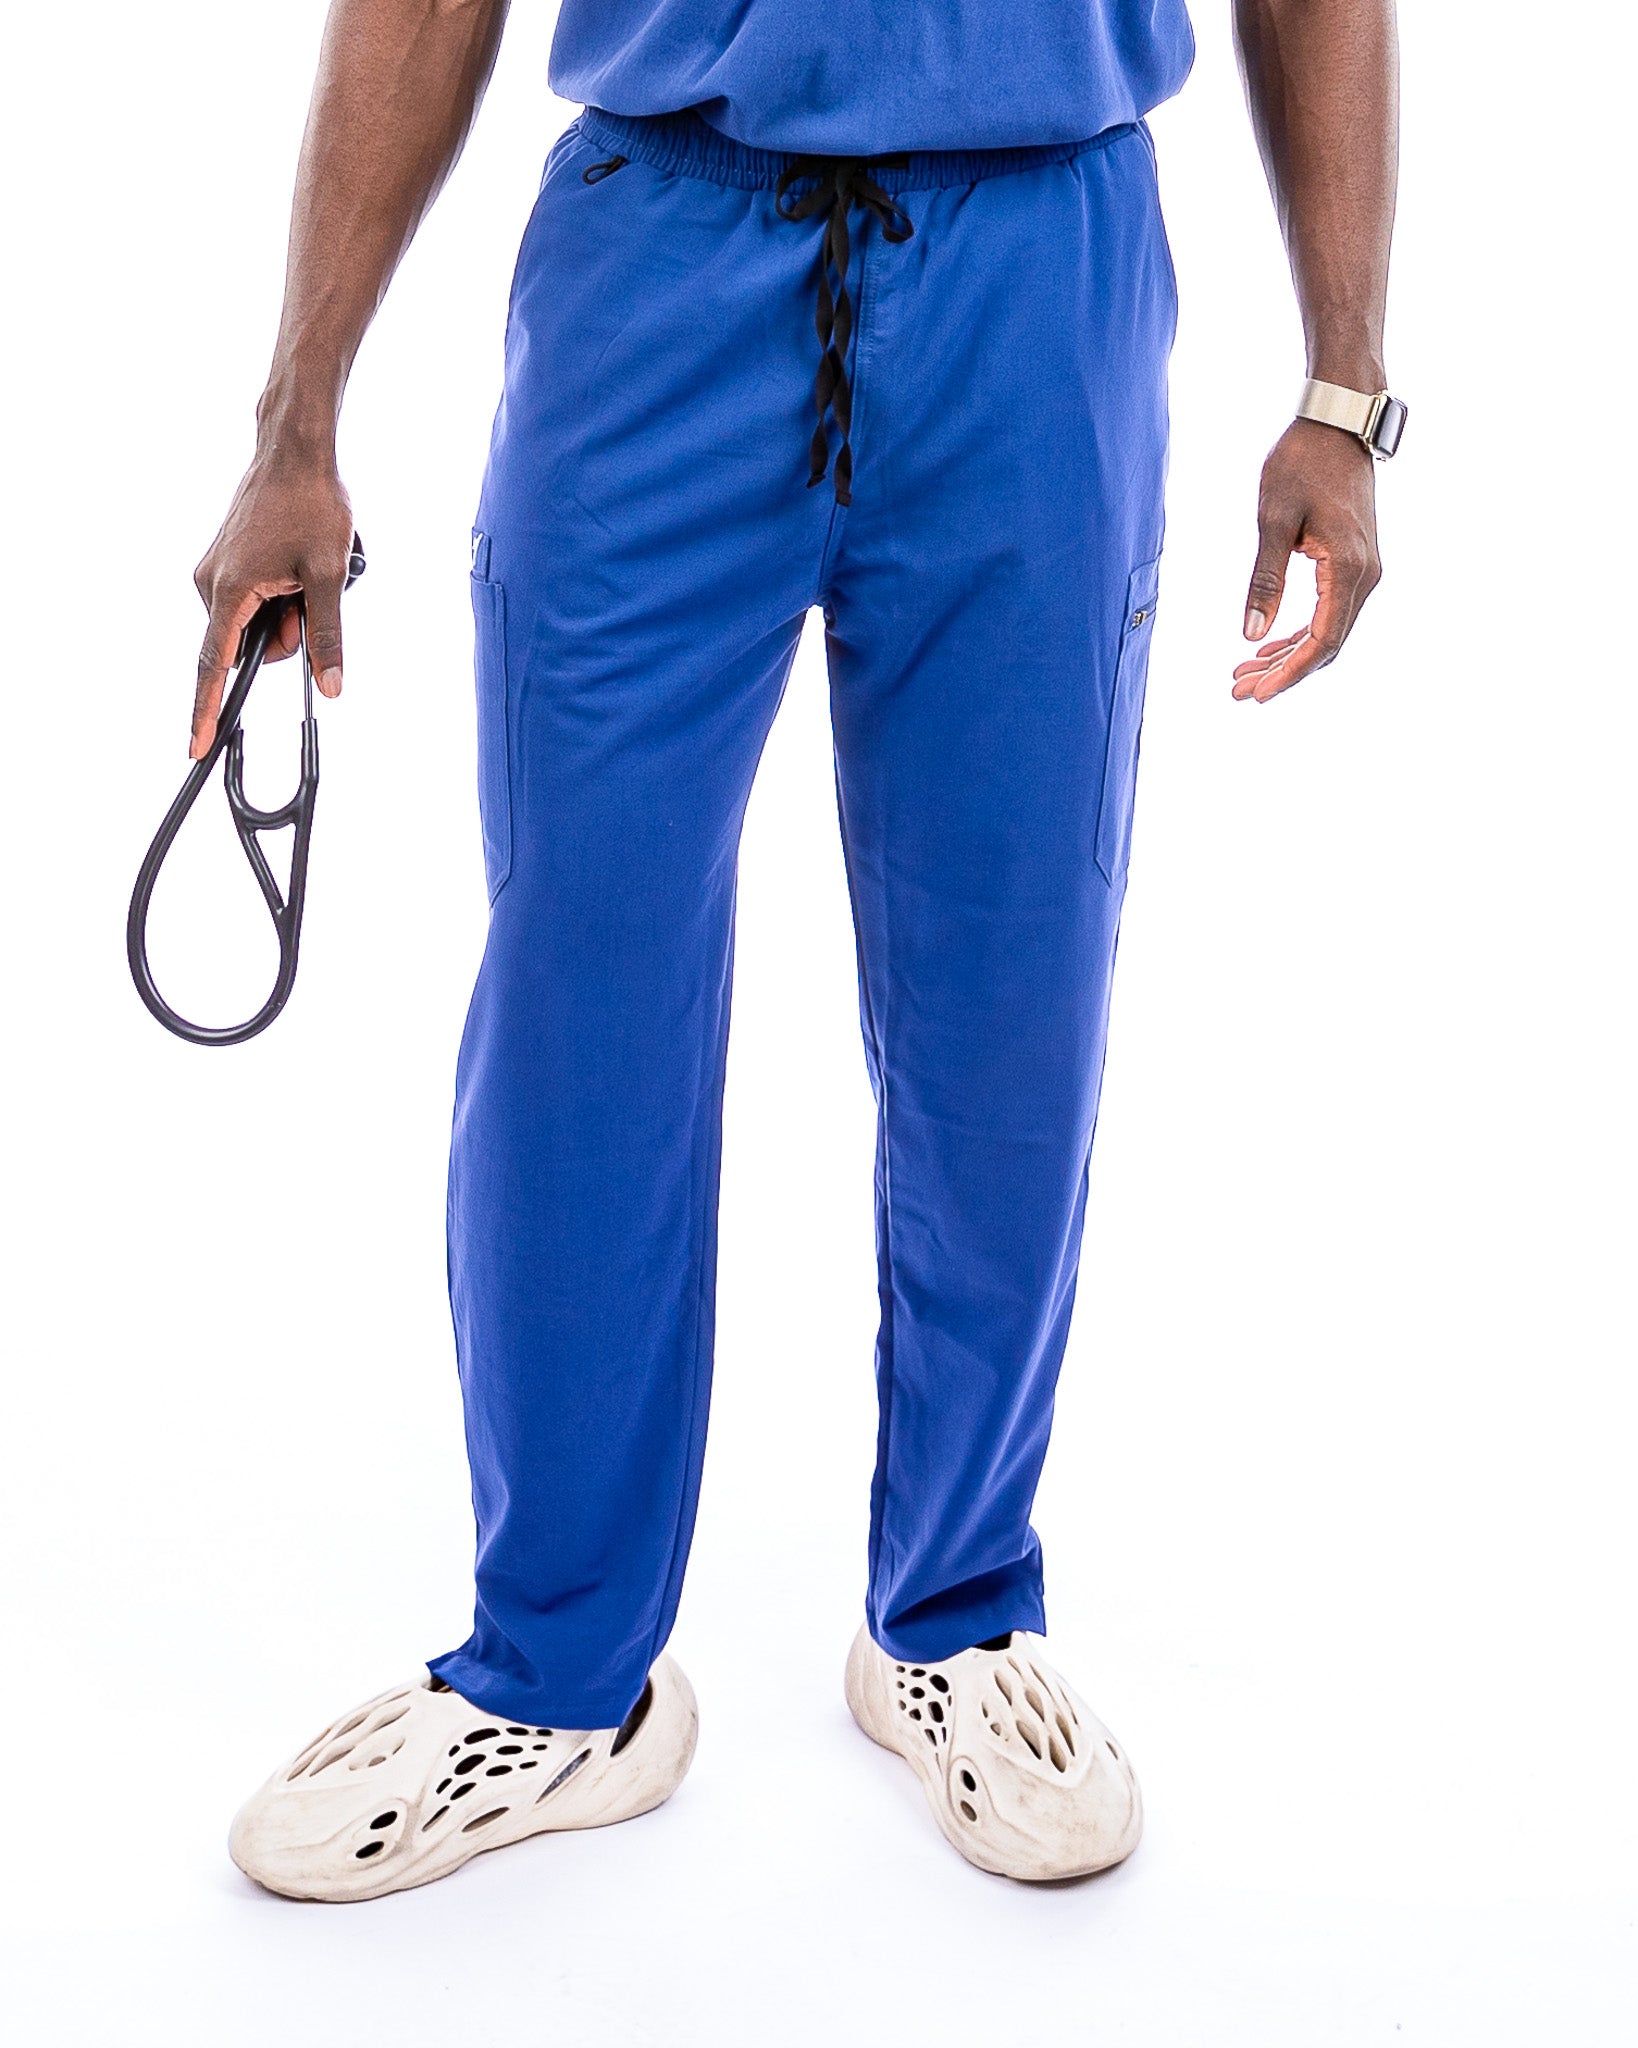 Shop WYND Mens Scrub Pant with 2 Back Pockets Online